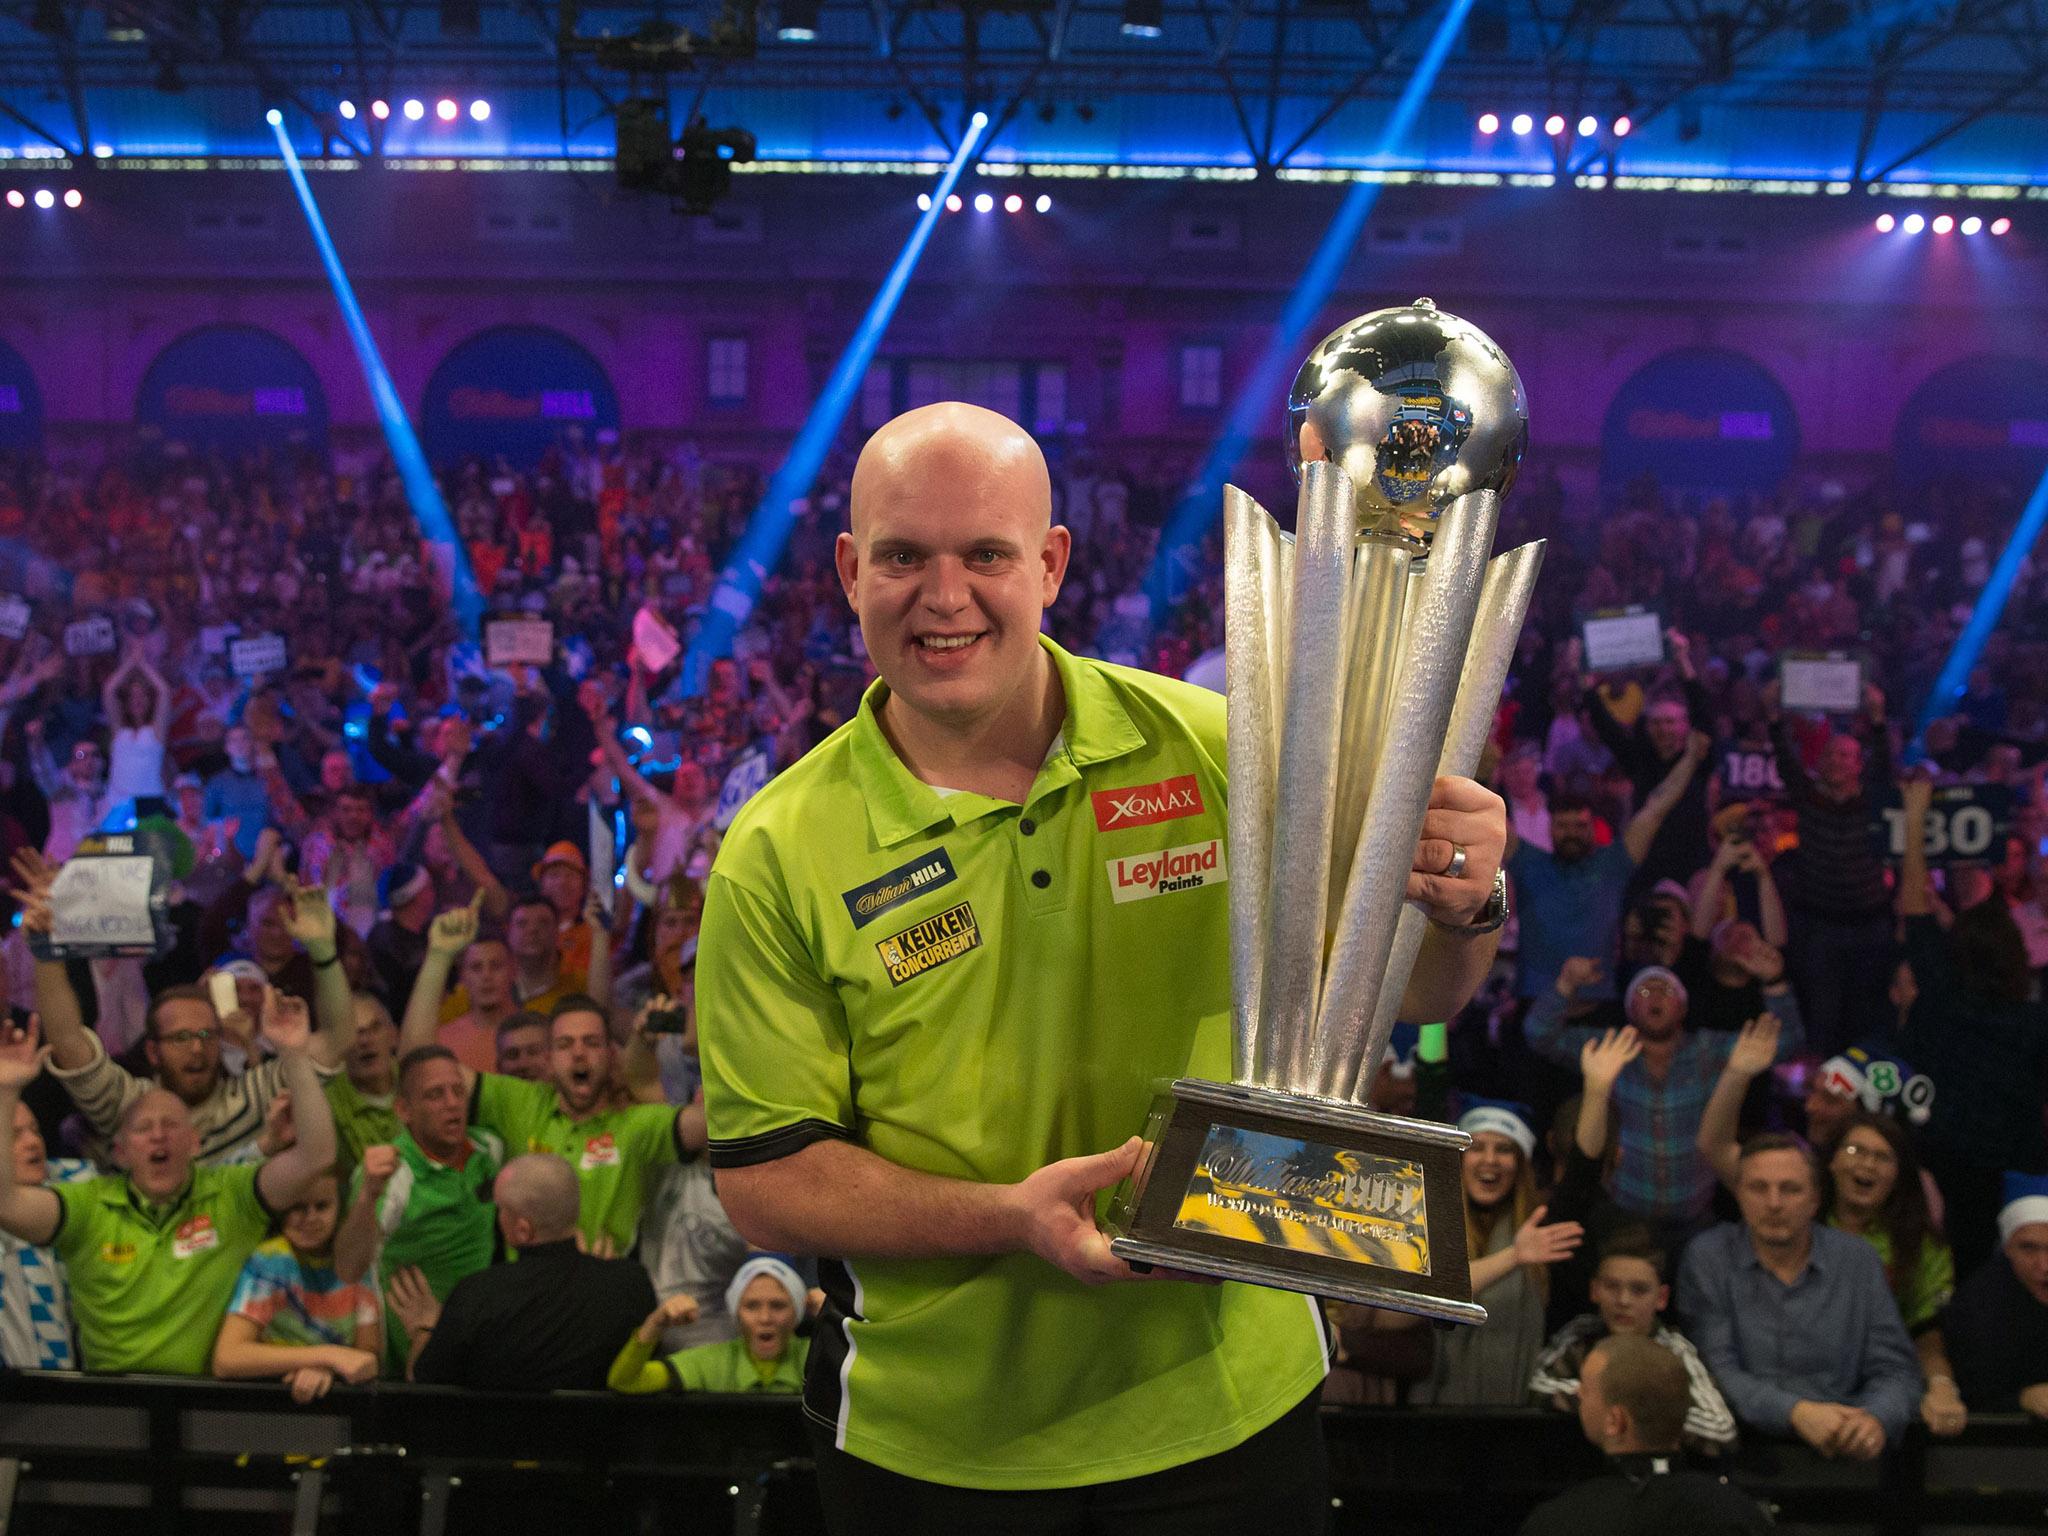 Even though Van Gerwen is now dominant, Taylor insists he'd have beaten him at his pomp